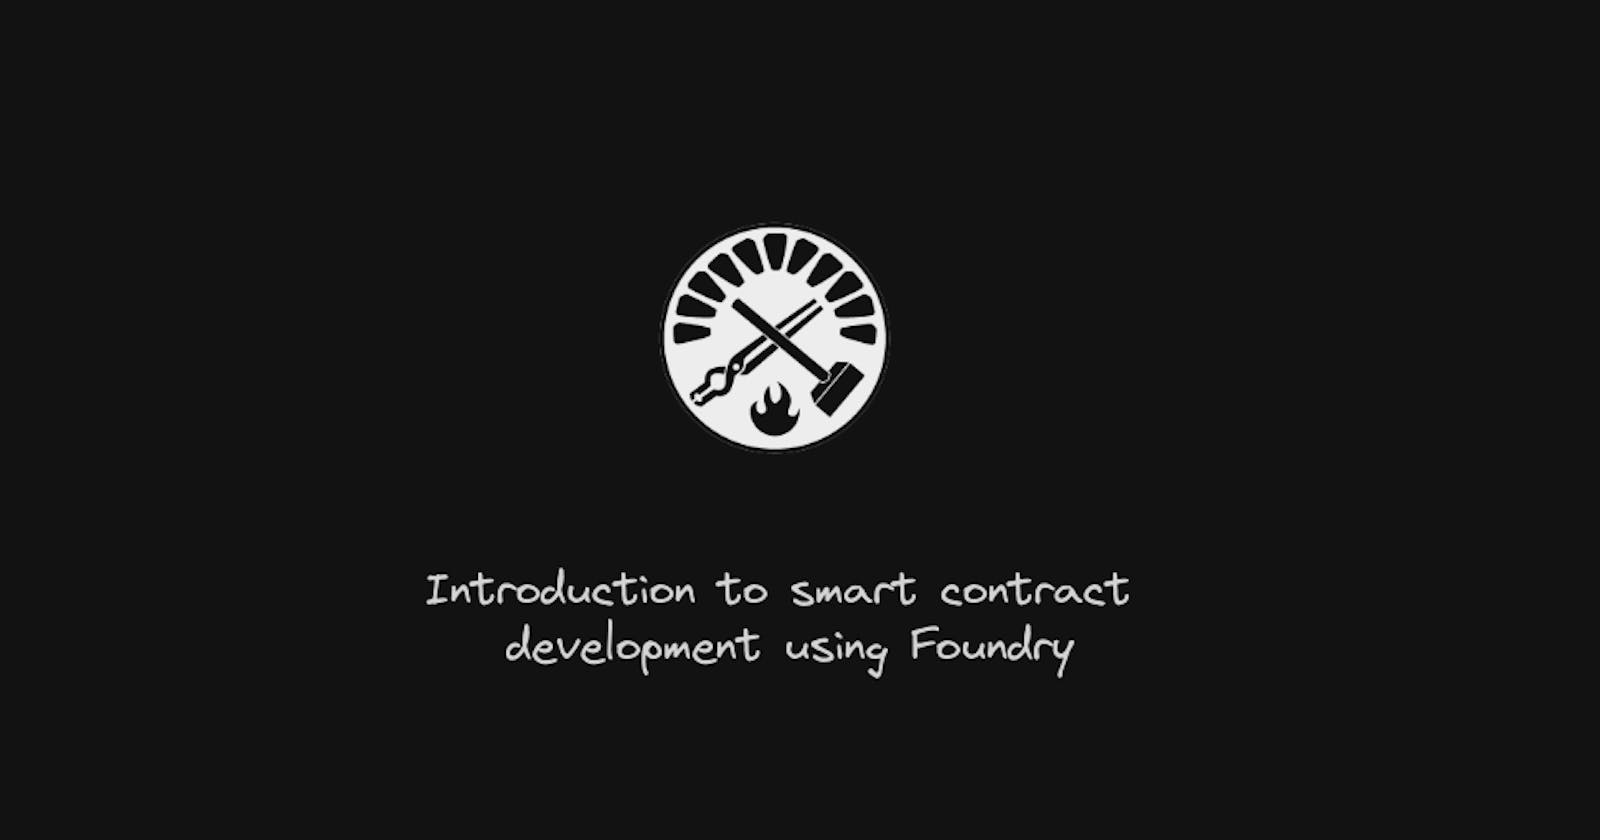 Introduction to smart contract development using Foundry